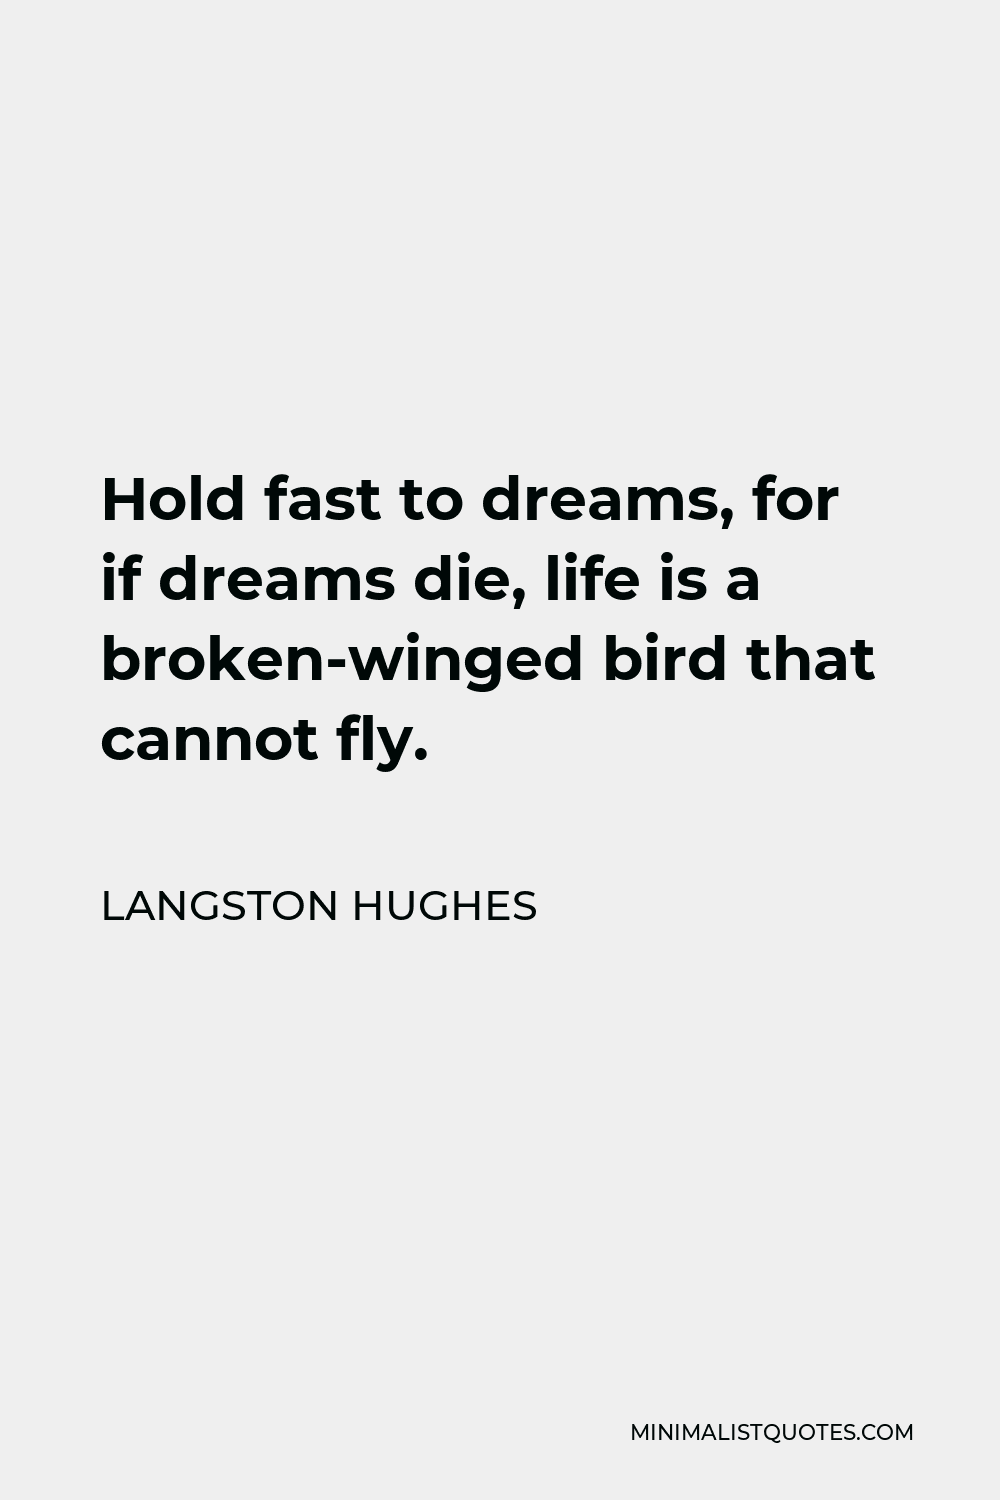 Langston Hughes Quote - Hold fast to dreams, for if dreams die, life is a broken-winged bird that cannot fly.